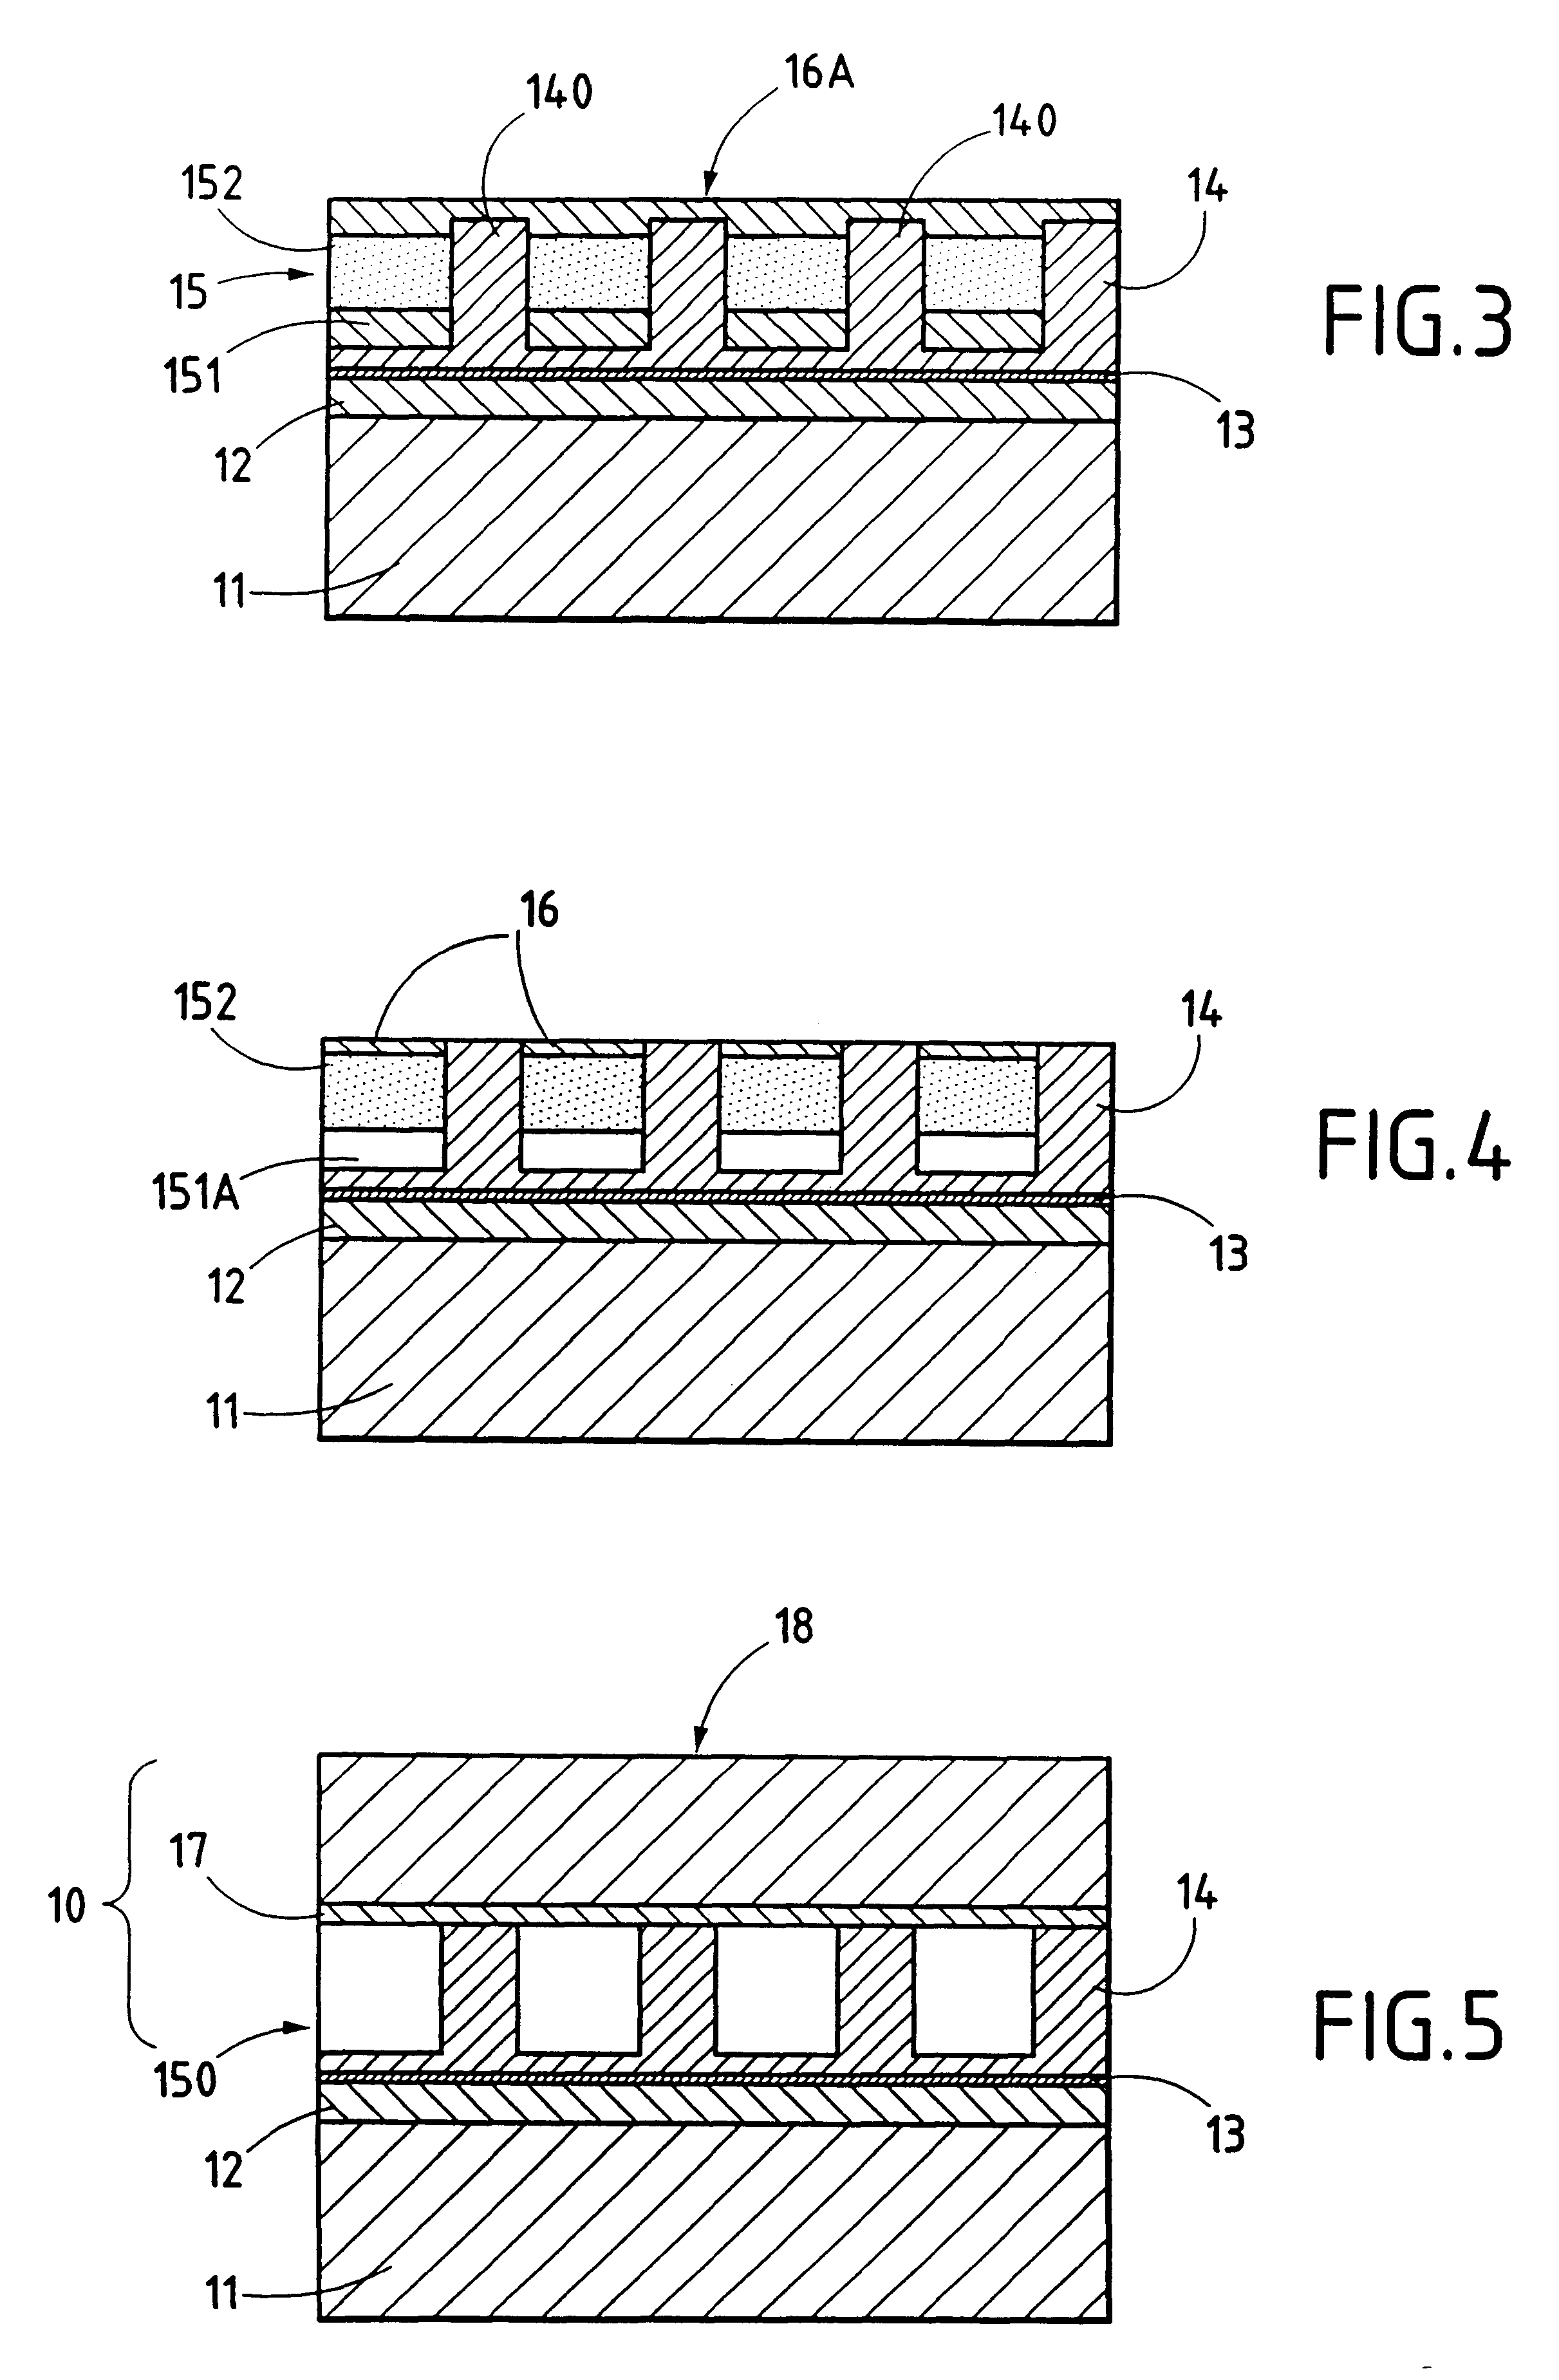 High heat flux regenerative circuit, in particular for the combustion chamber of a rocket engine